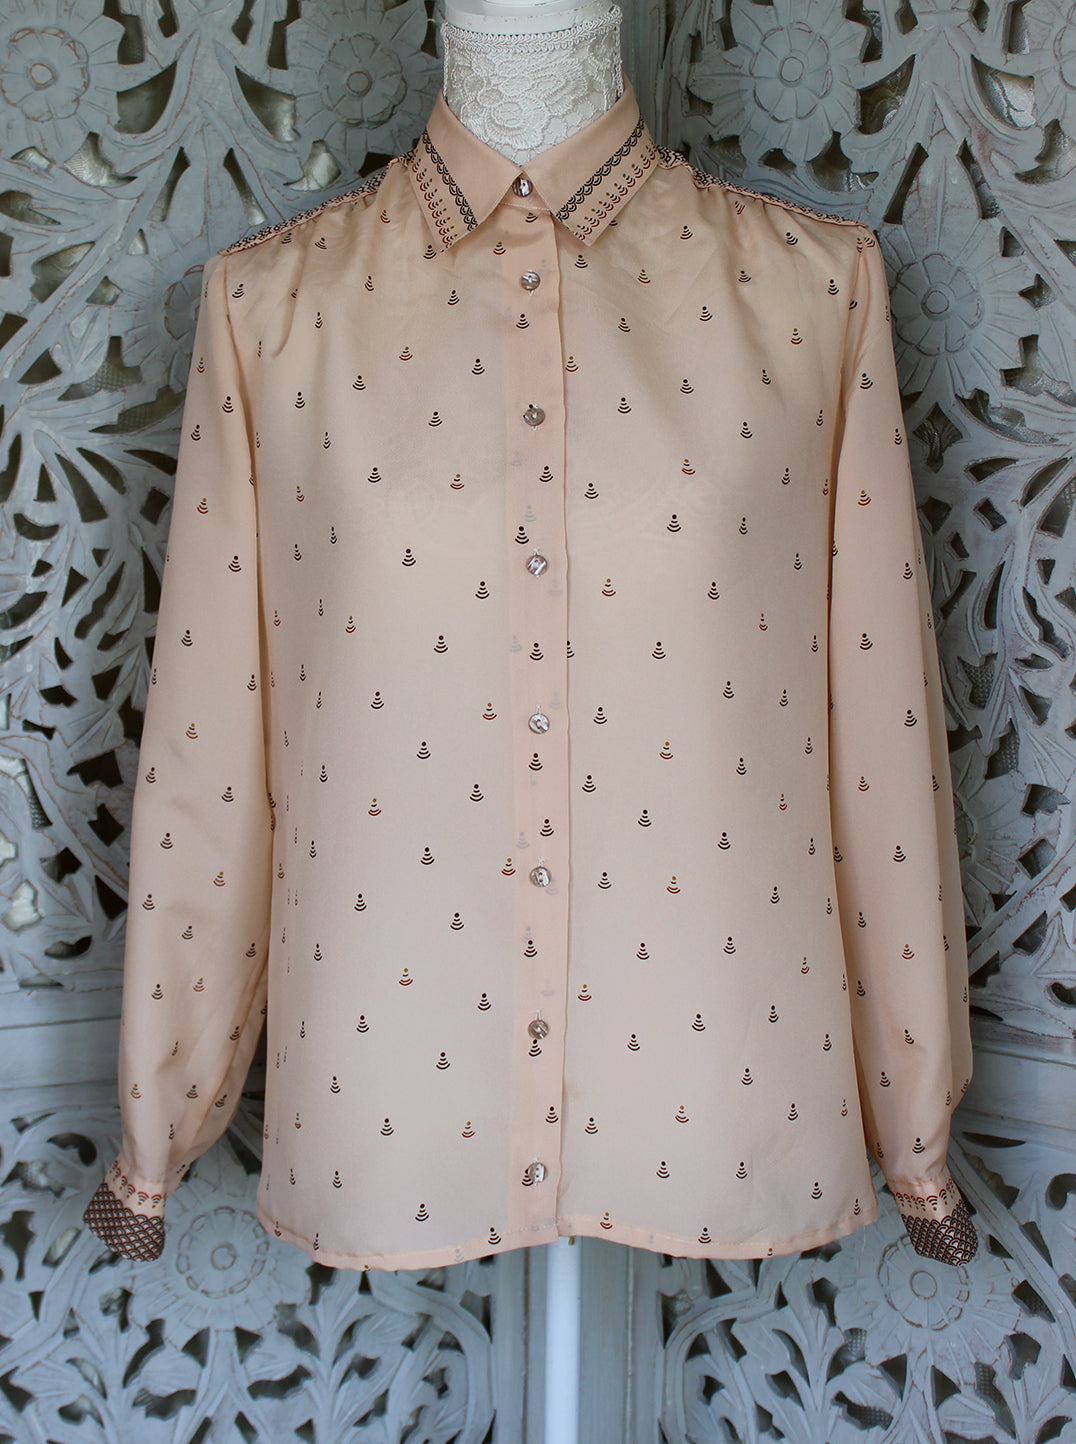 Beige Blouse with Brown Pattern